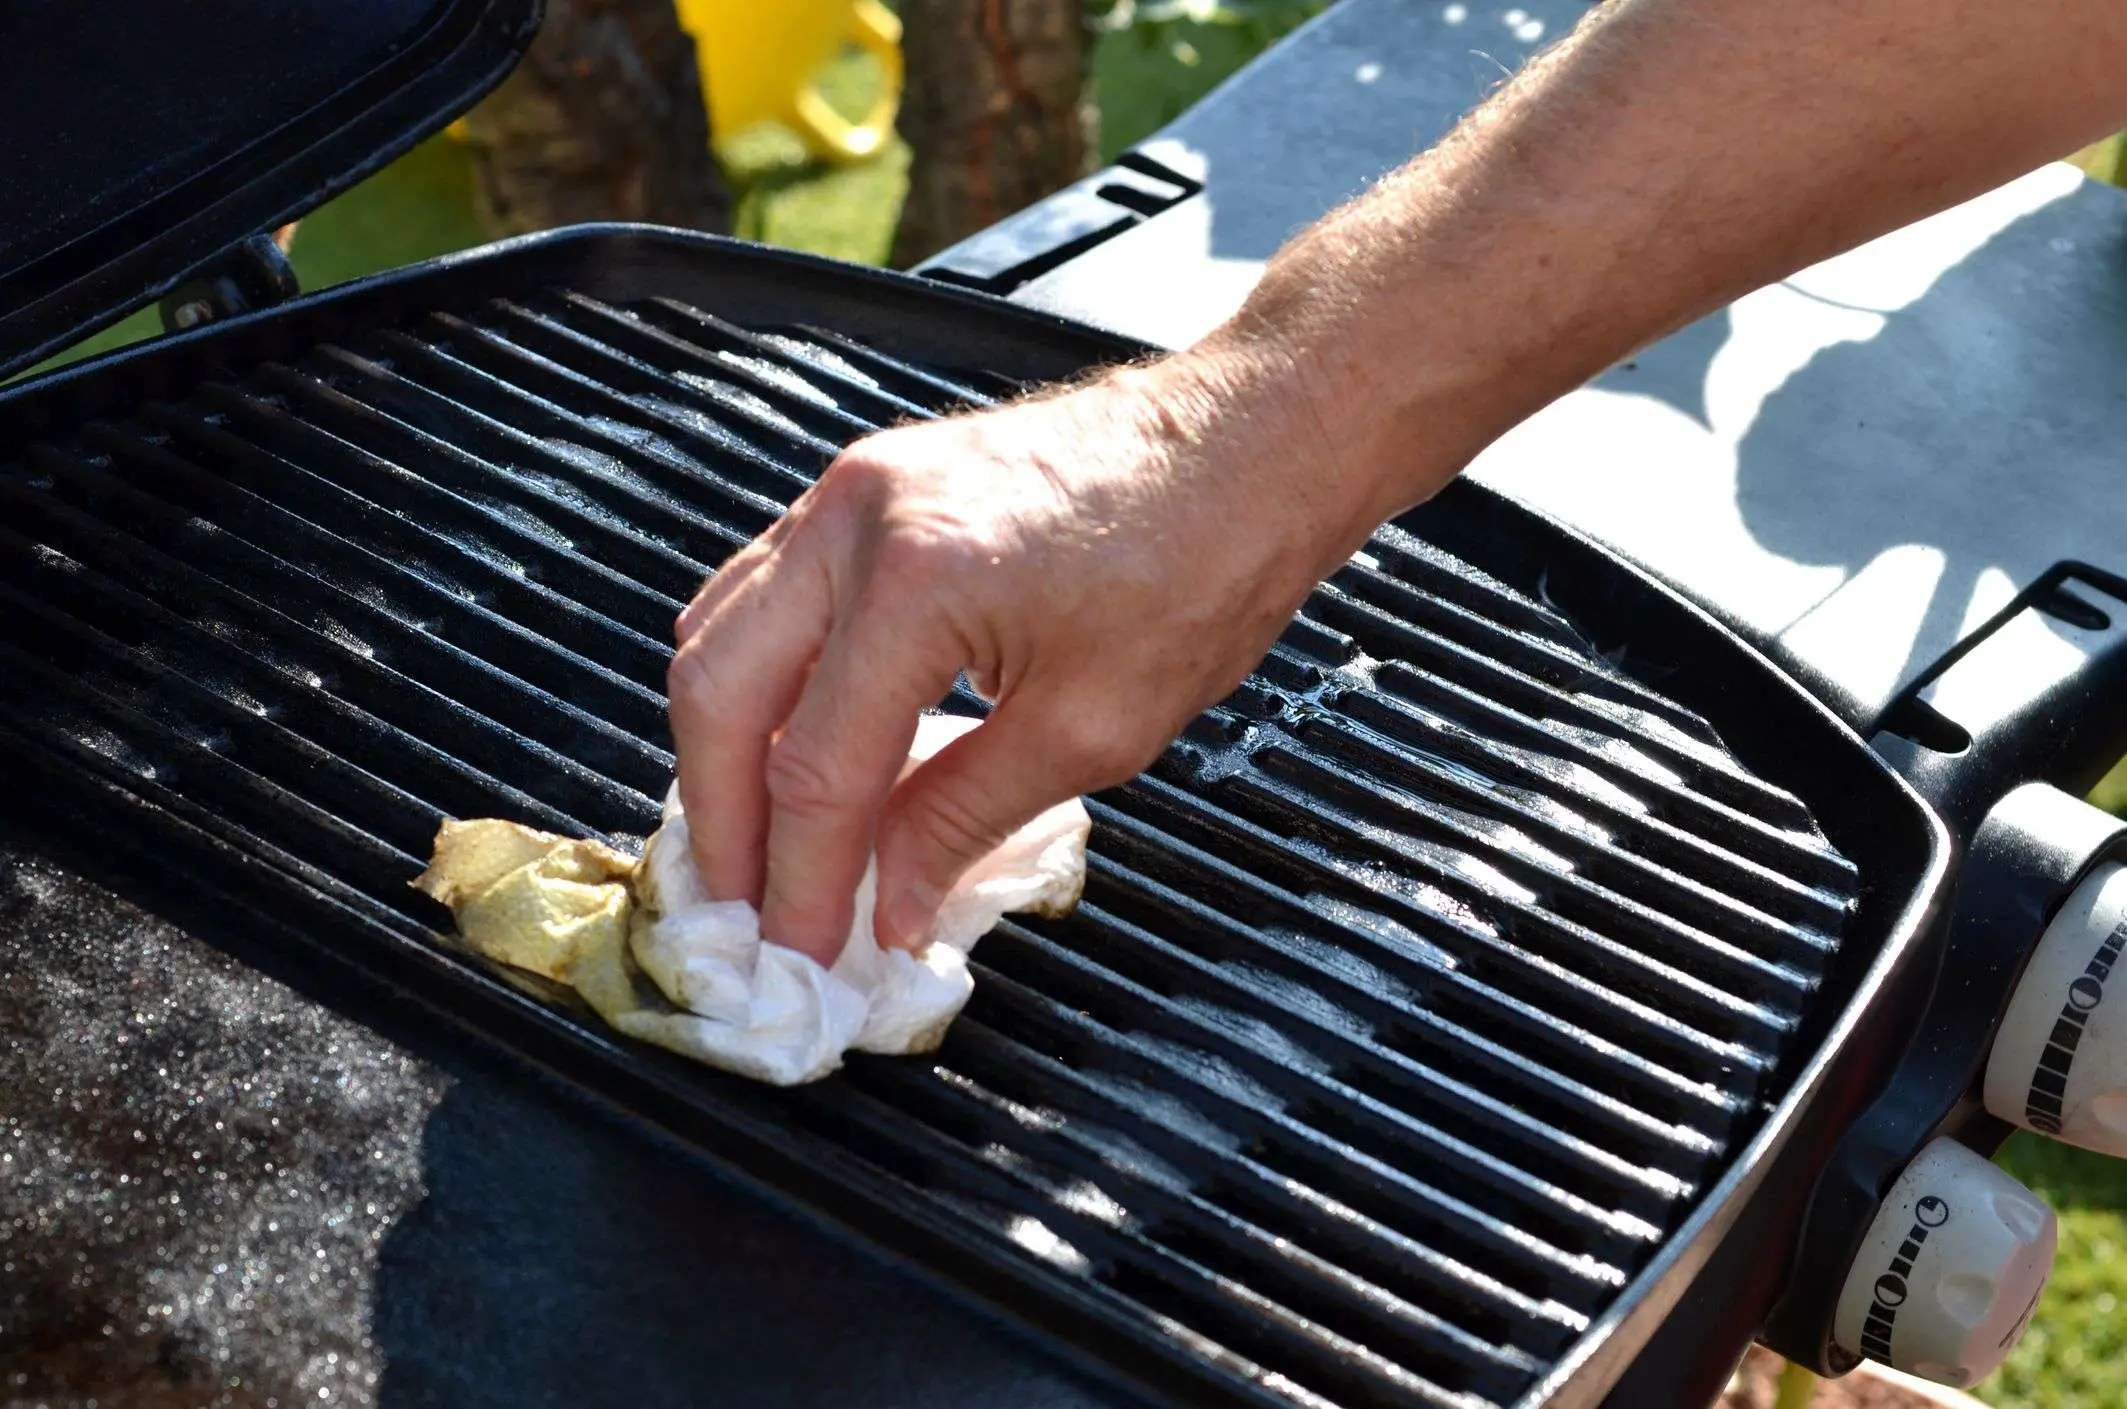 how to properly clean a grill mishkanet com